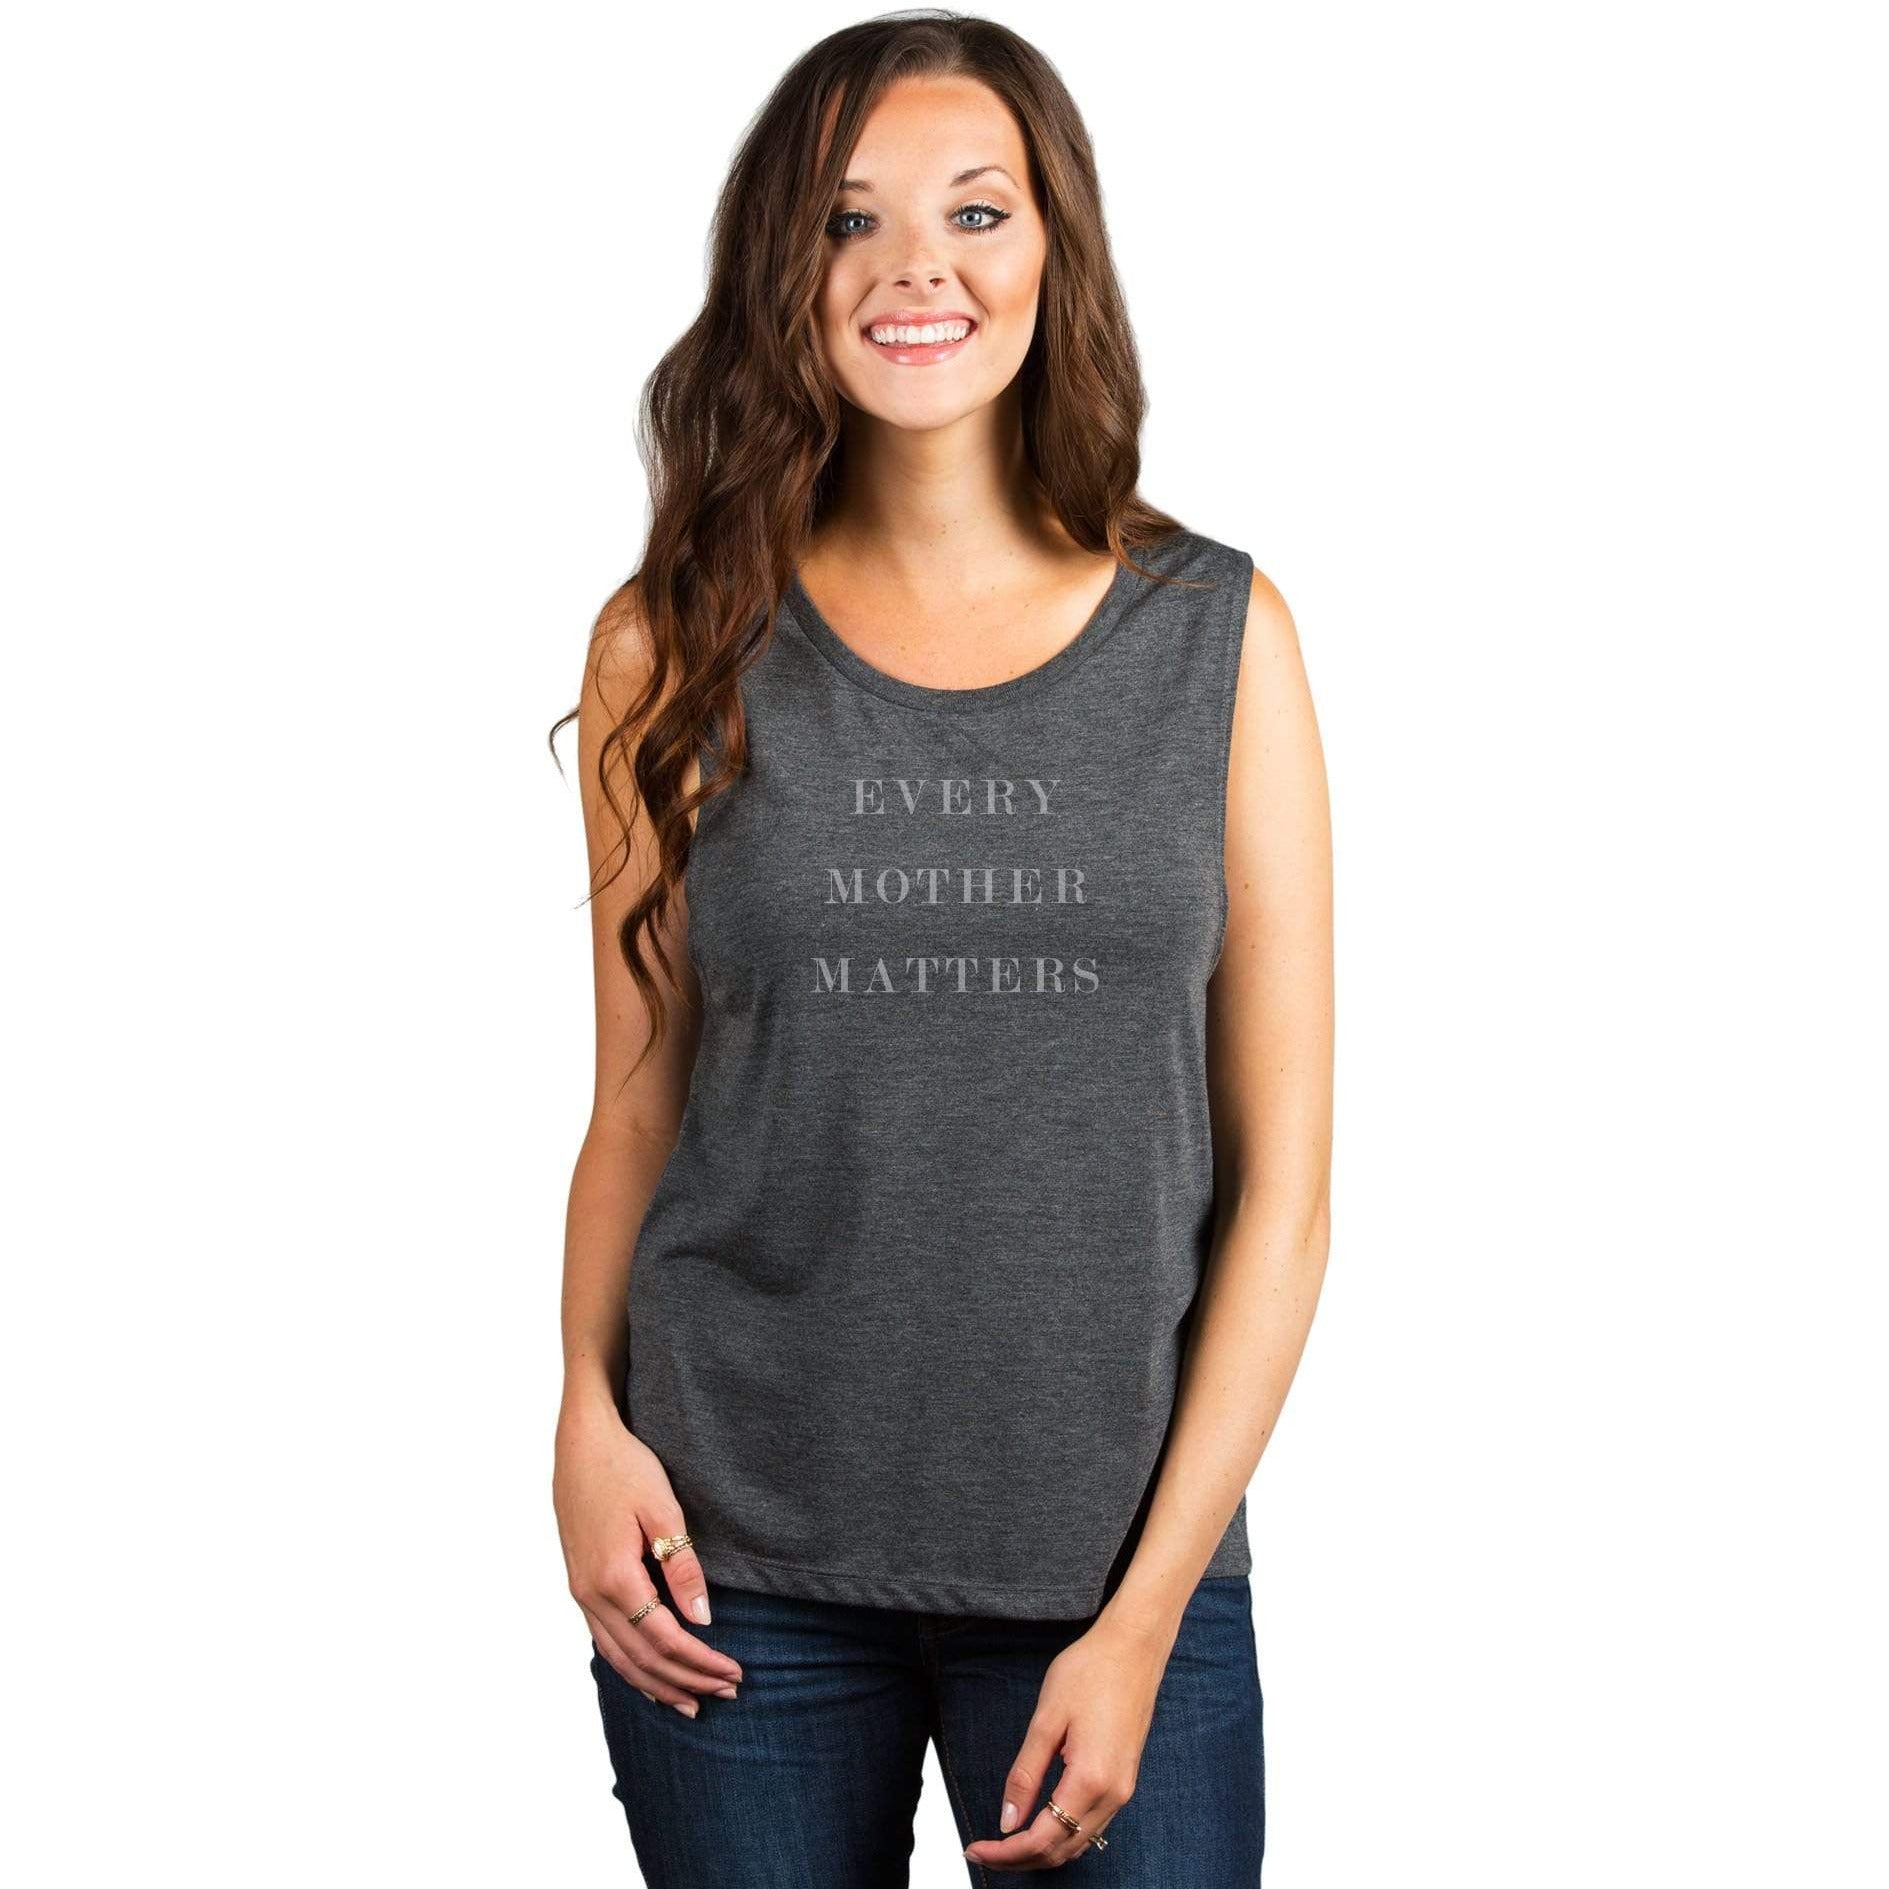 Every Mother Matters And Sunshine Women's Relaxed Muscle Tank Tee Charcoal Model
